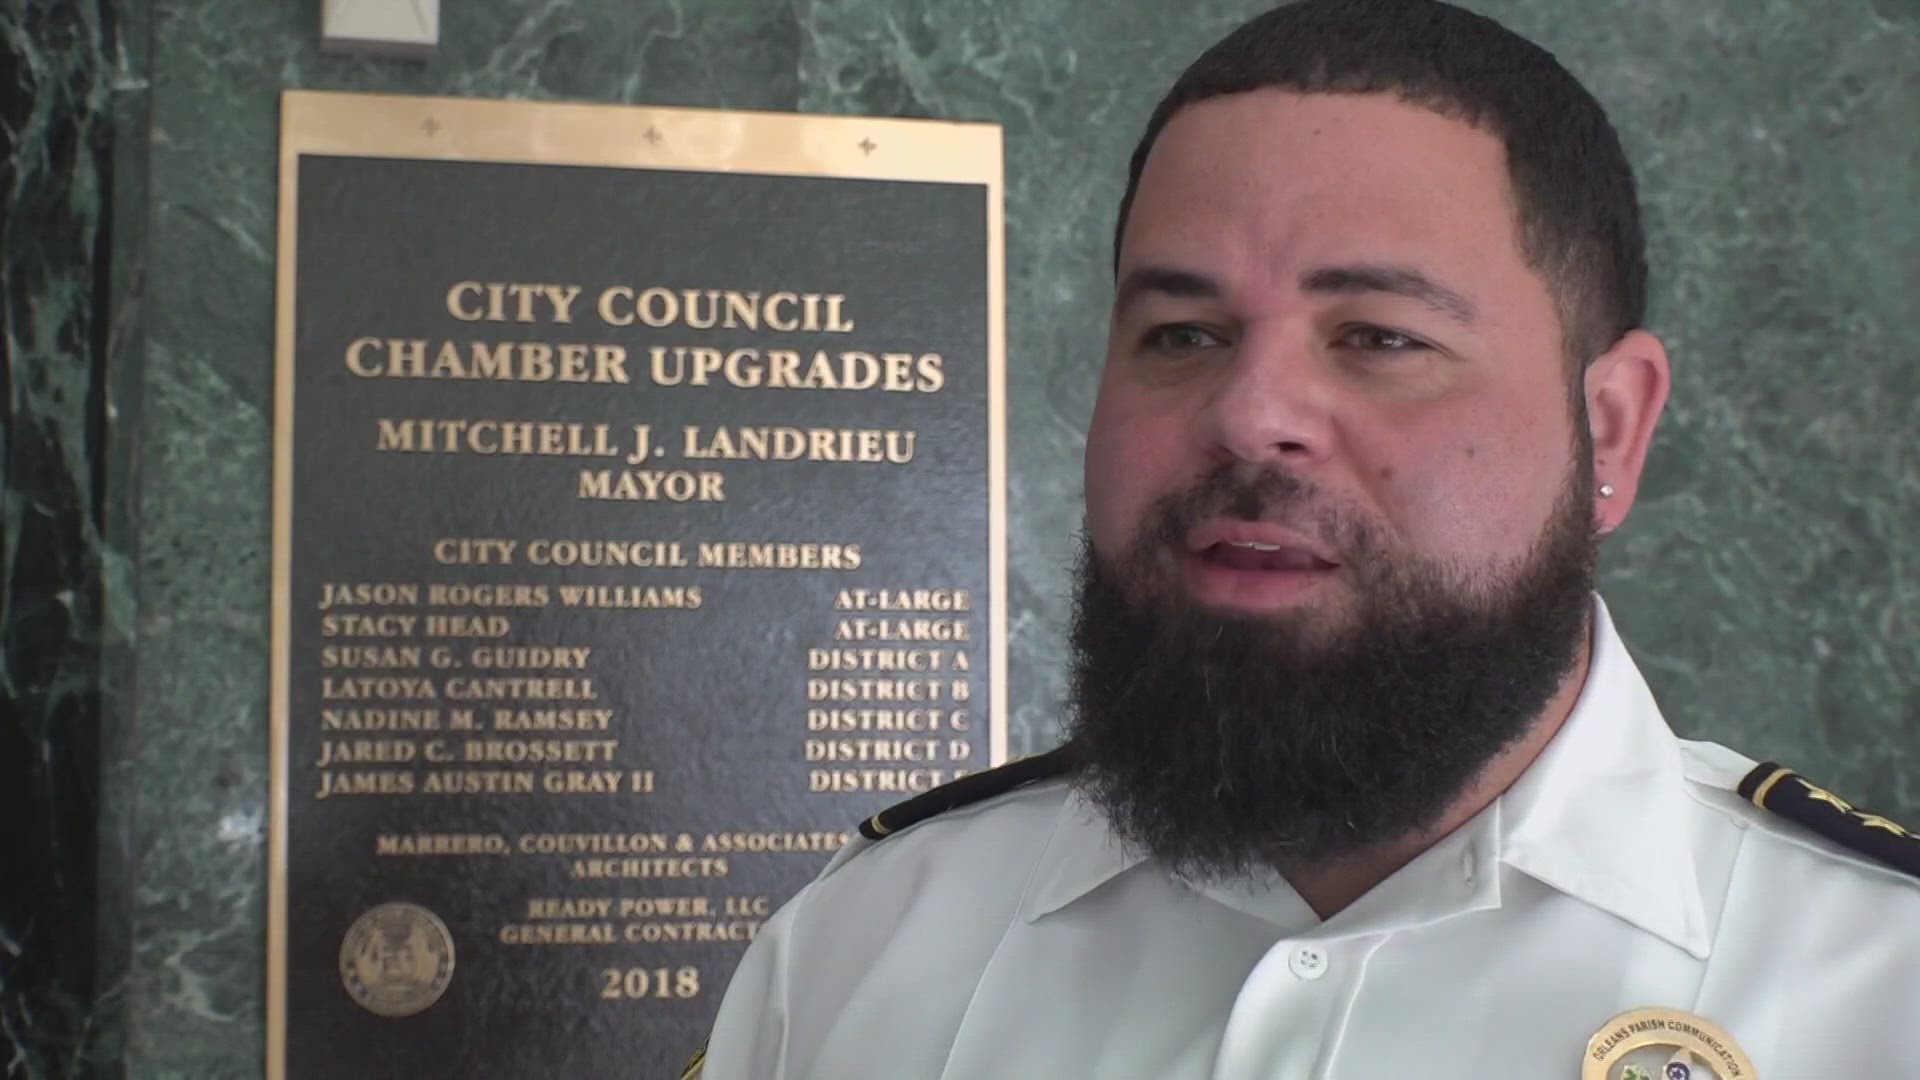 Councilmembers Helena Moreno and J.P. Morrell said in a letter that Tyrell Morris should be suspended prior to his announced Sept. 15 resignation.